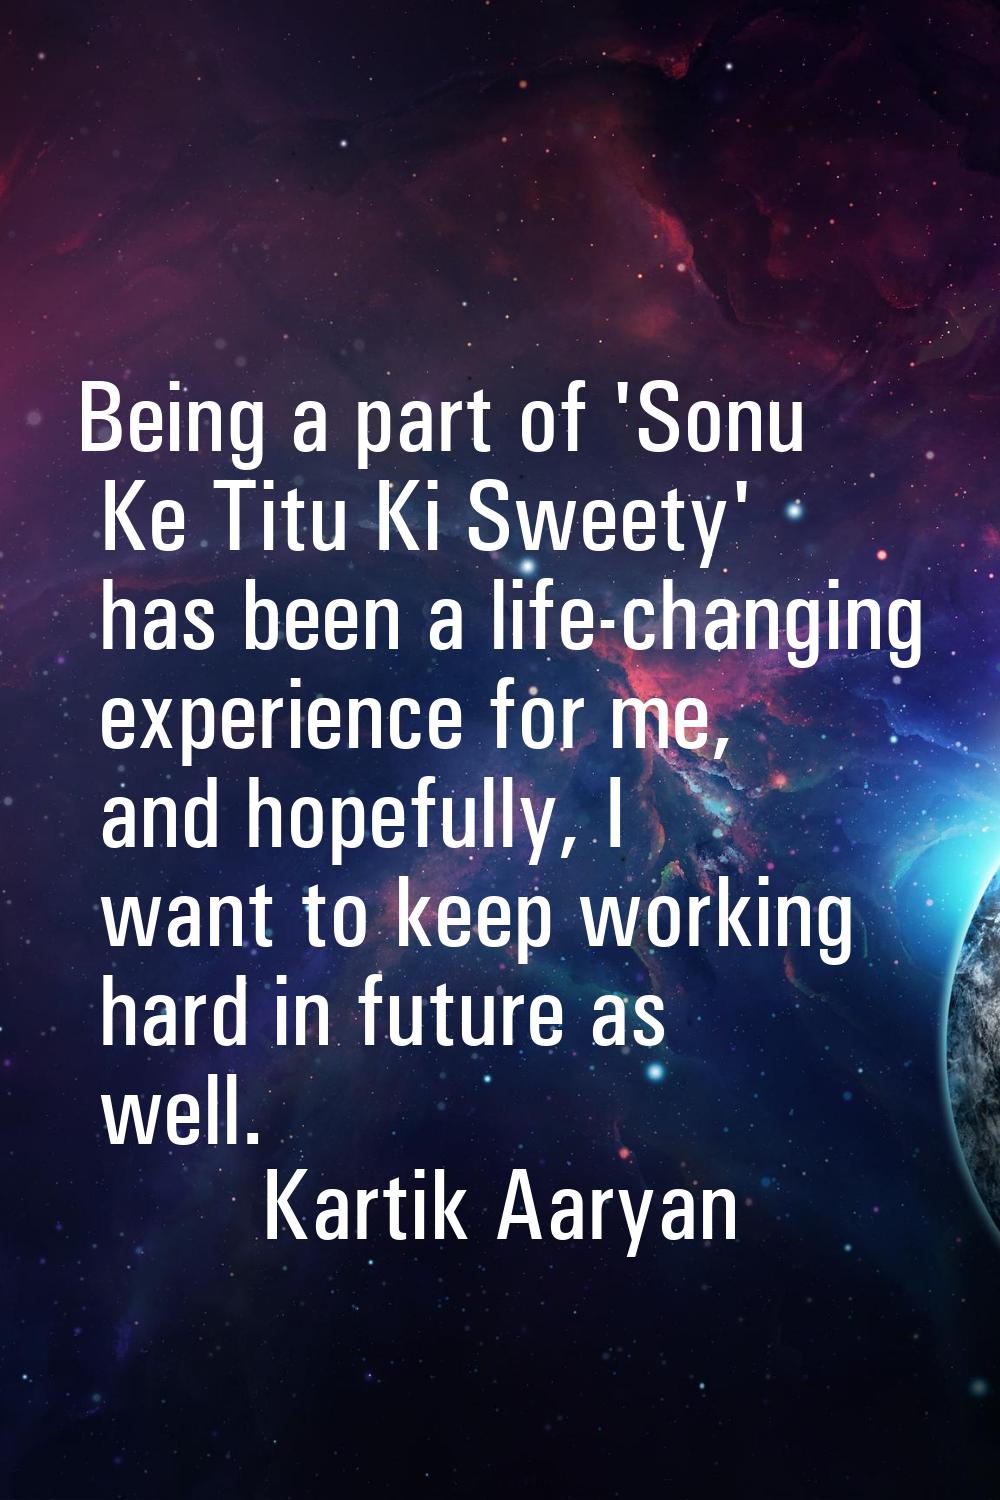 Being a part of 'Sonu Ke Titu Ki Sweety' has been a life-changing experience for me, and hopefully,